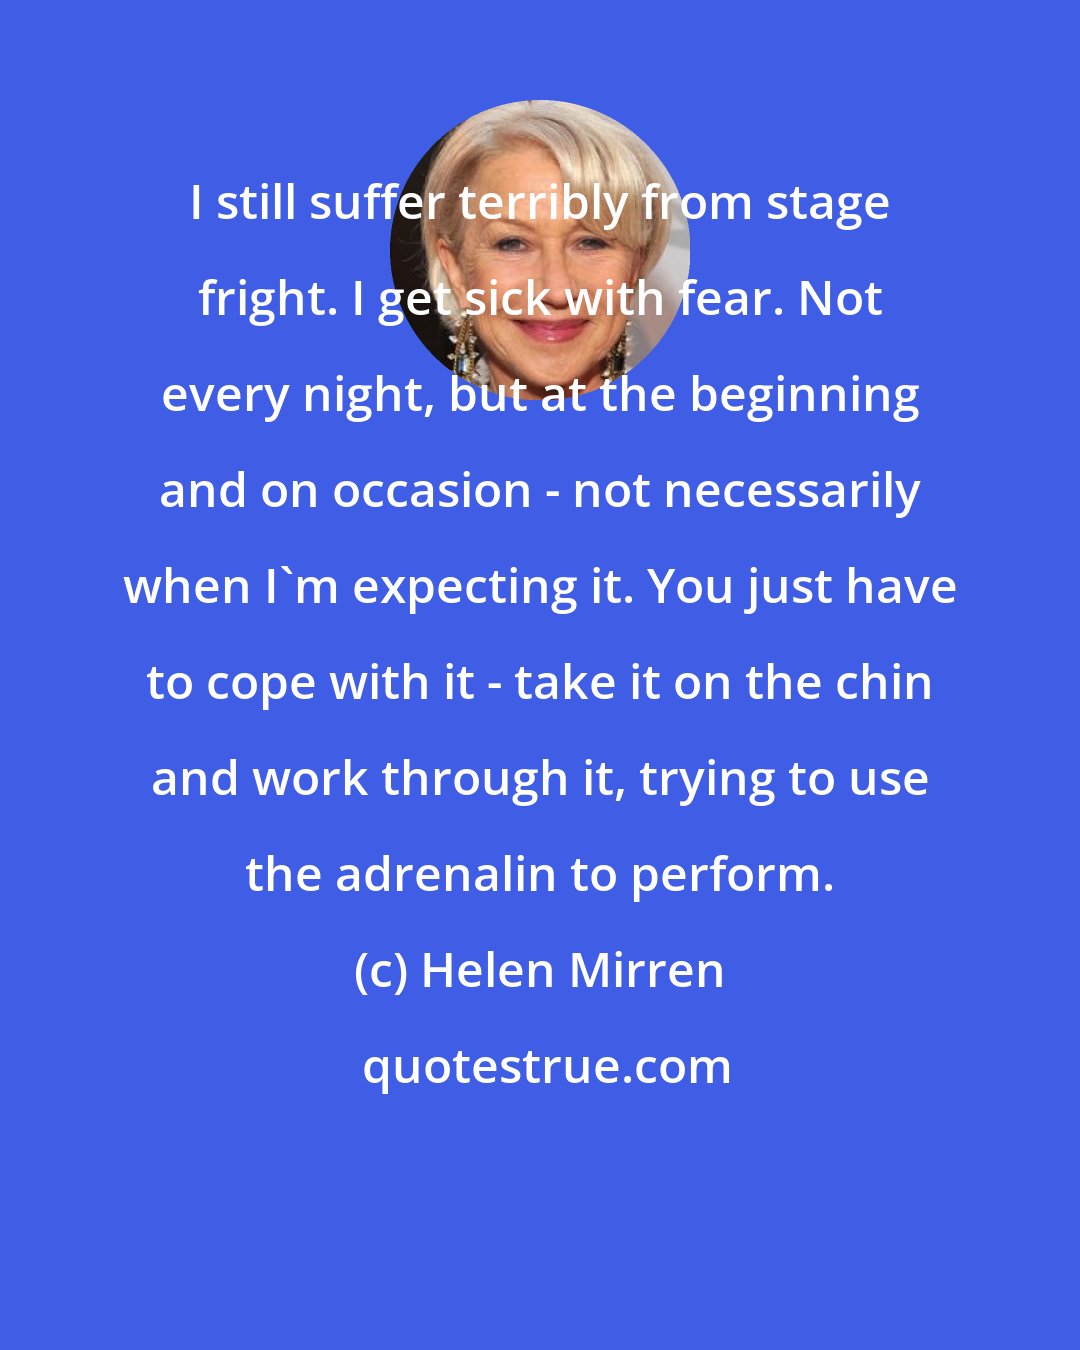 Helen Mirren: I still suffer terribly from stage fright. I get sick with fear. Not every night, but at the beginning and on occasion - not necessarily when I'm expecting it. You just have to cope with it - take it on the chin and work through it, trying to use the adrenalin to perform.